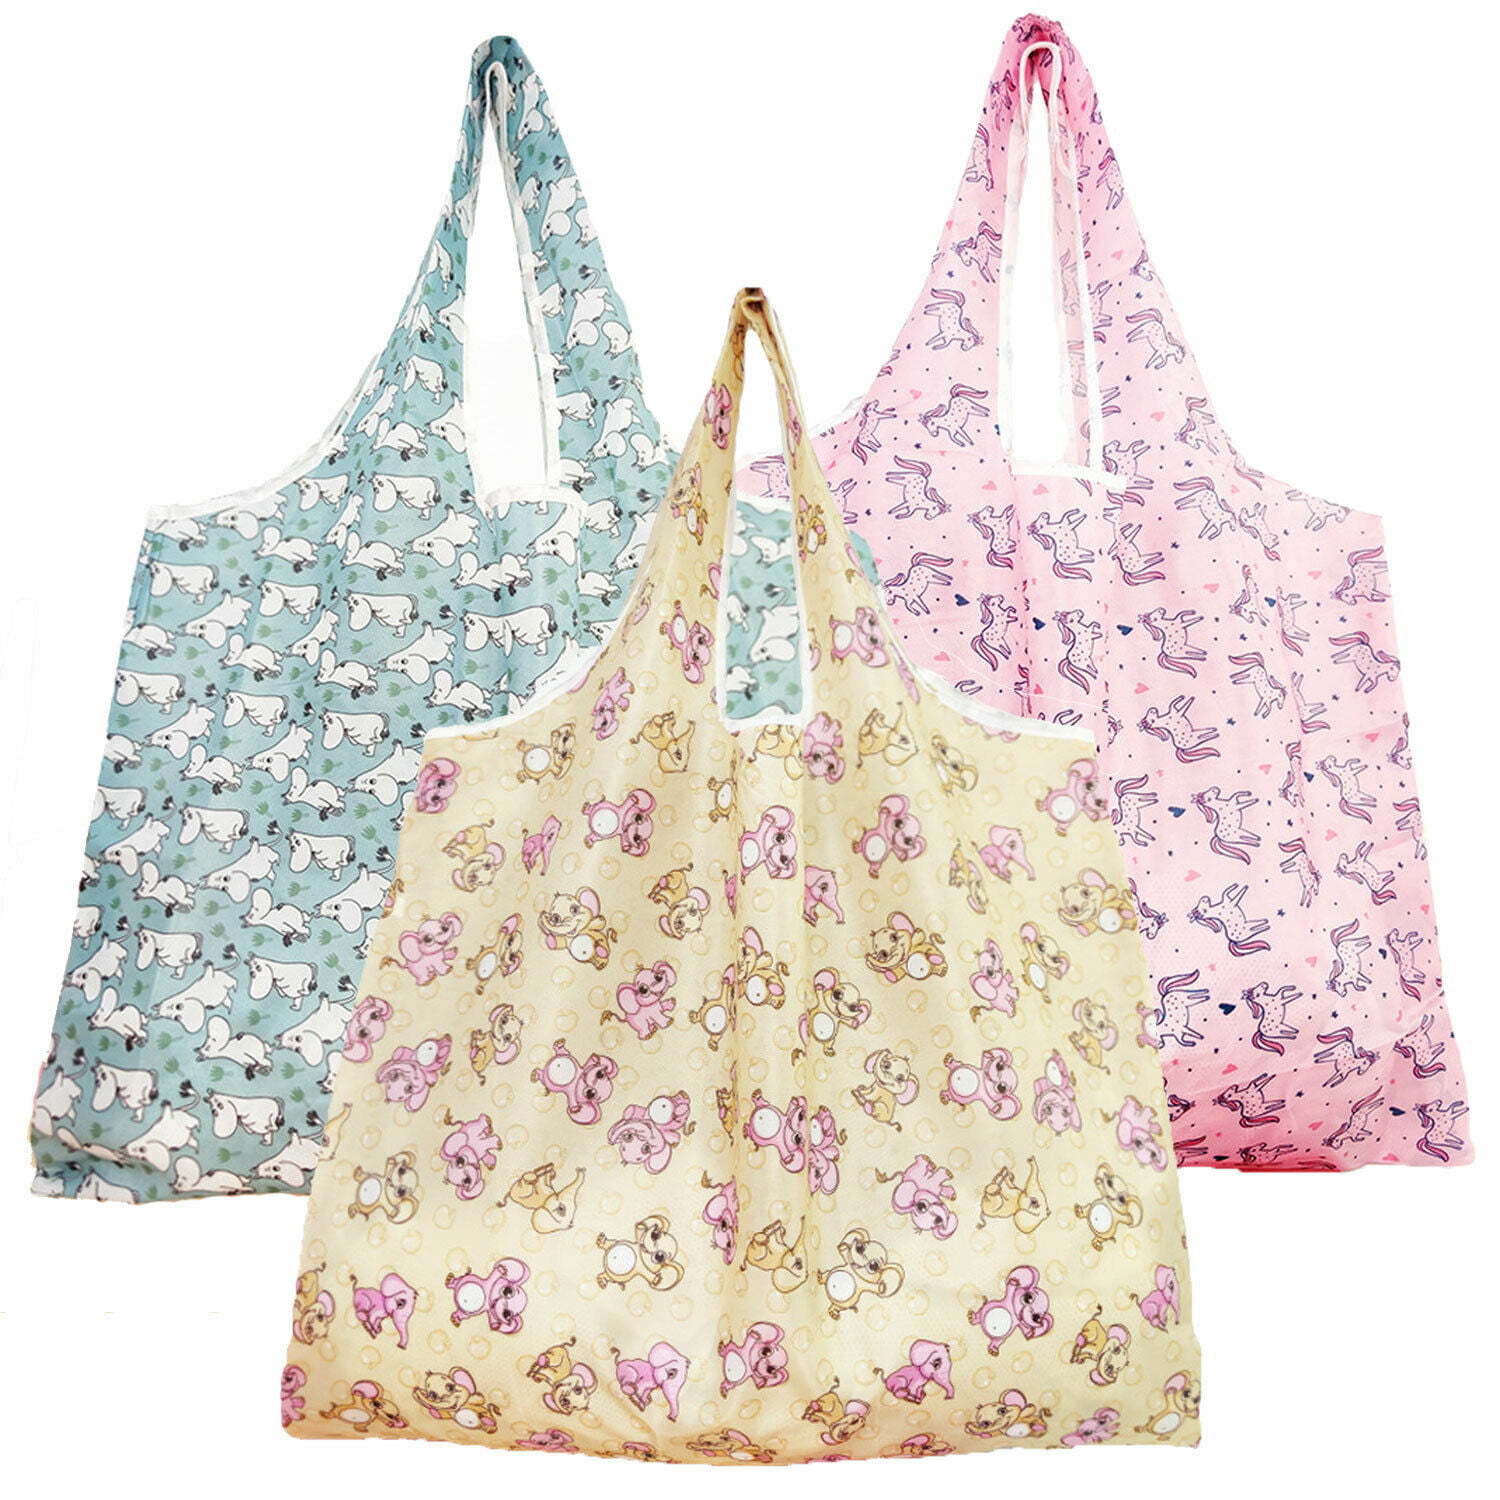 Details about   XLarge Reusable Grocery Shopping Bag Foldable Waterproof Floral & Cartoon Print 